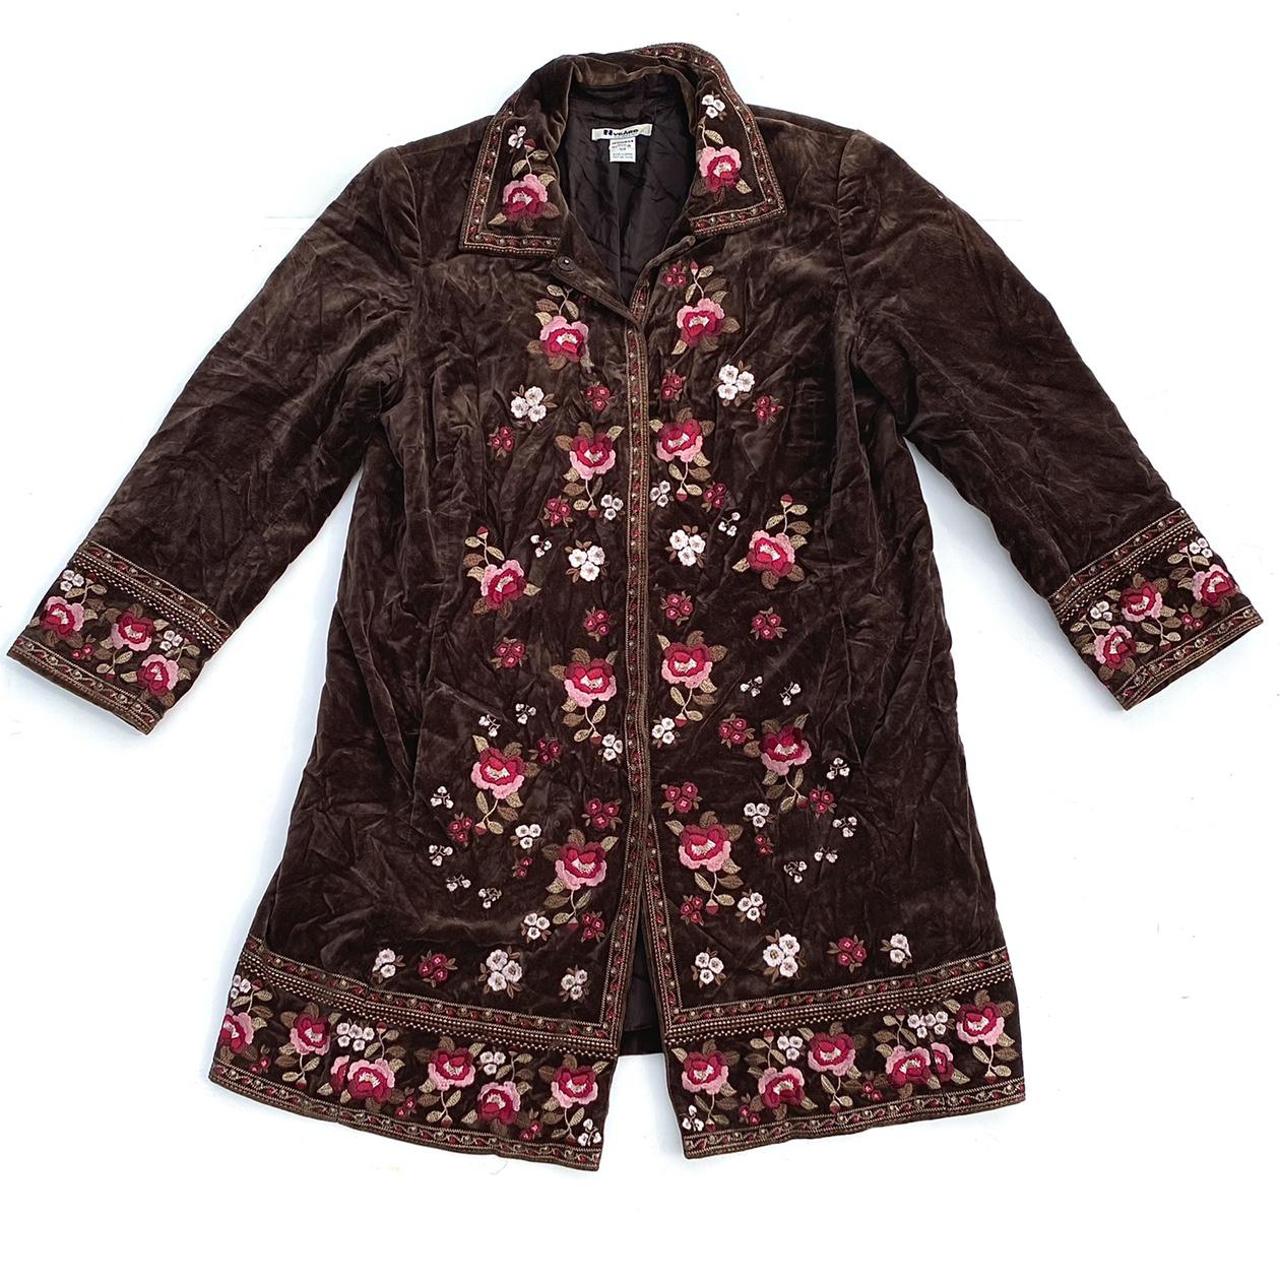 Nygard Collection Jacket Coat Embroidery Embroidered Brown W Pink White Flowers